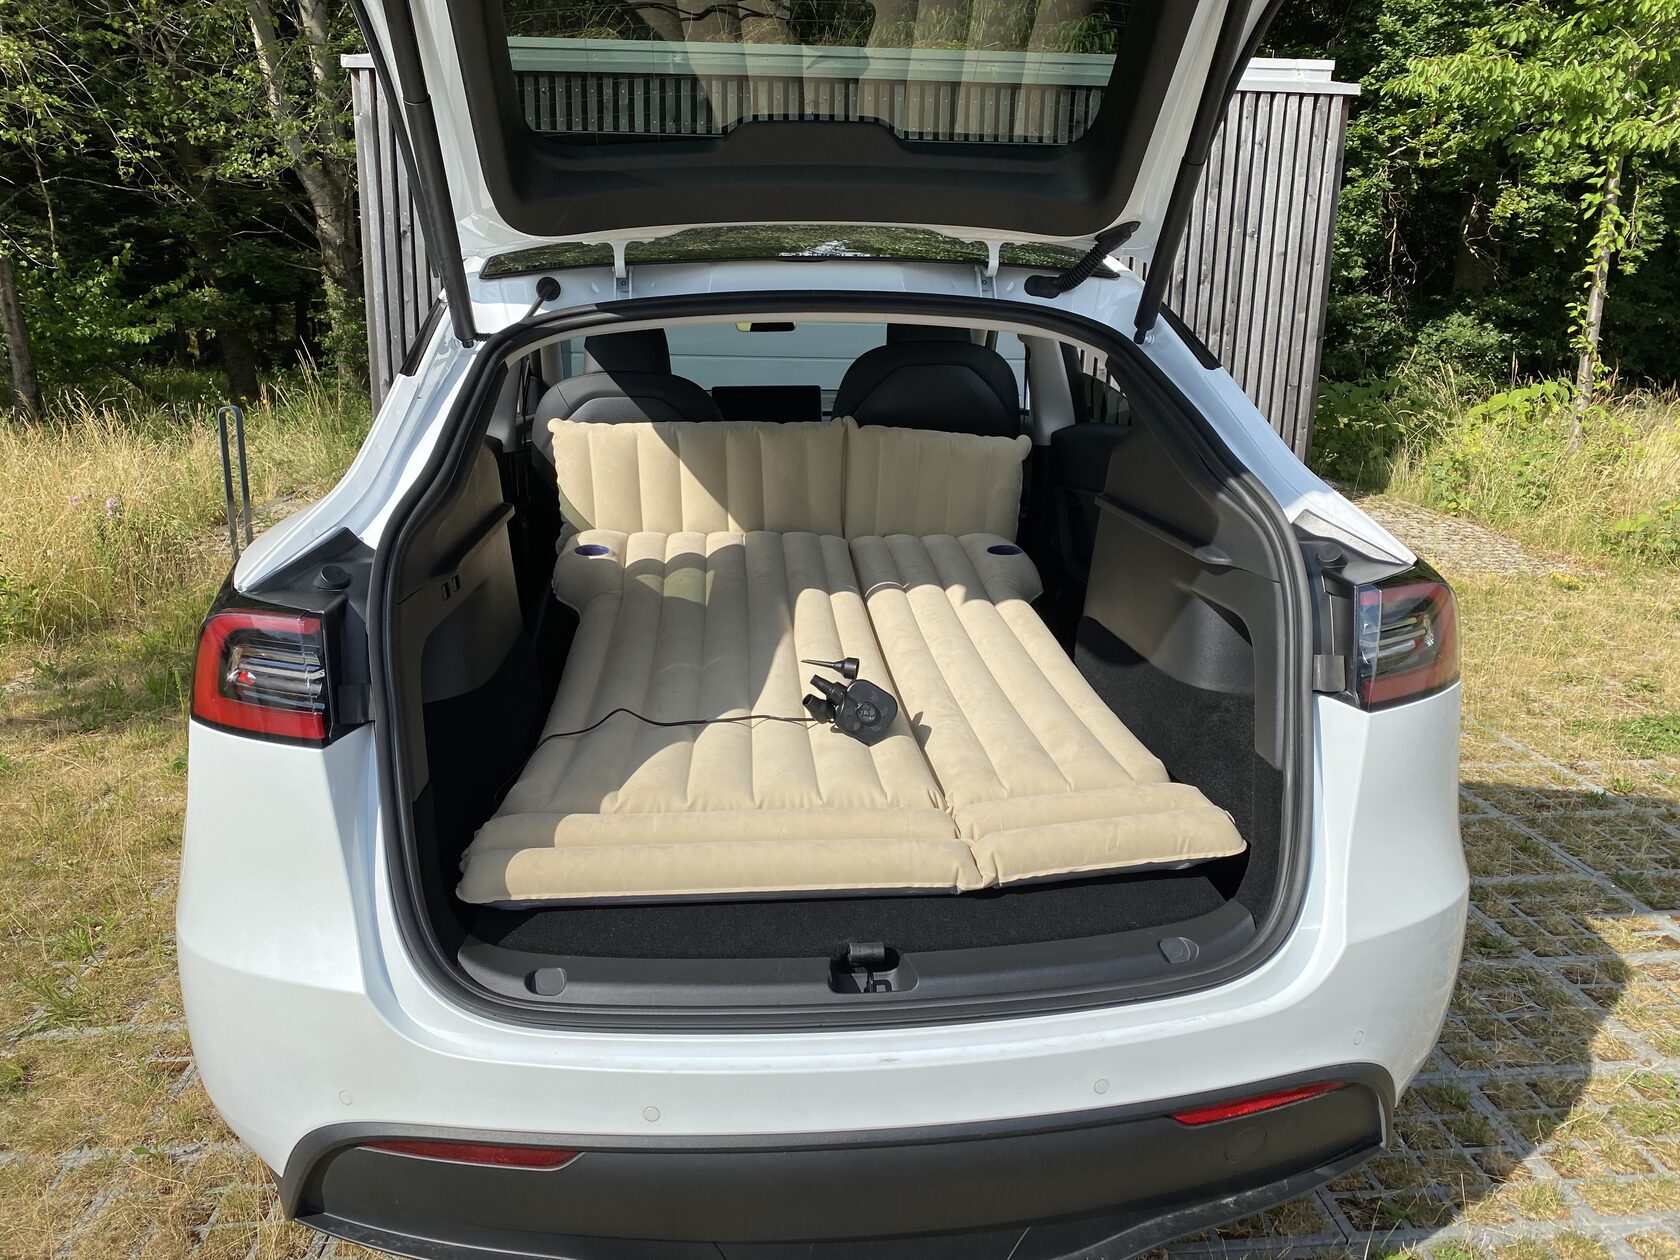 Tesla camping rental - camping equipment for your next adventure